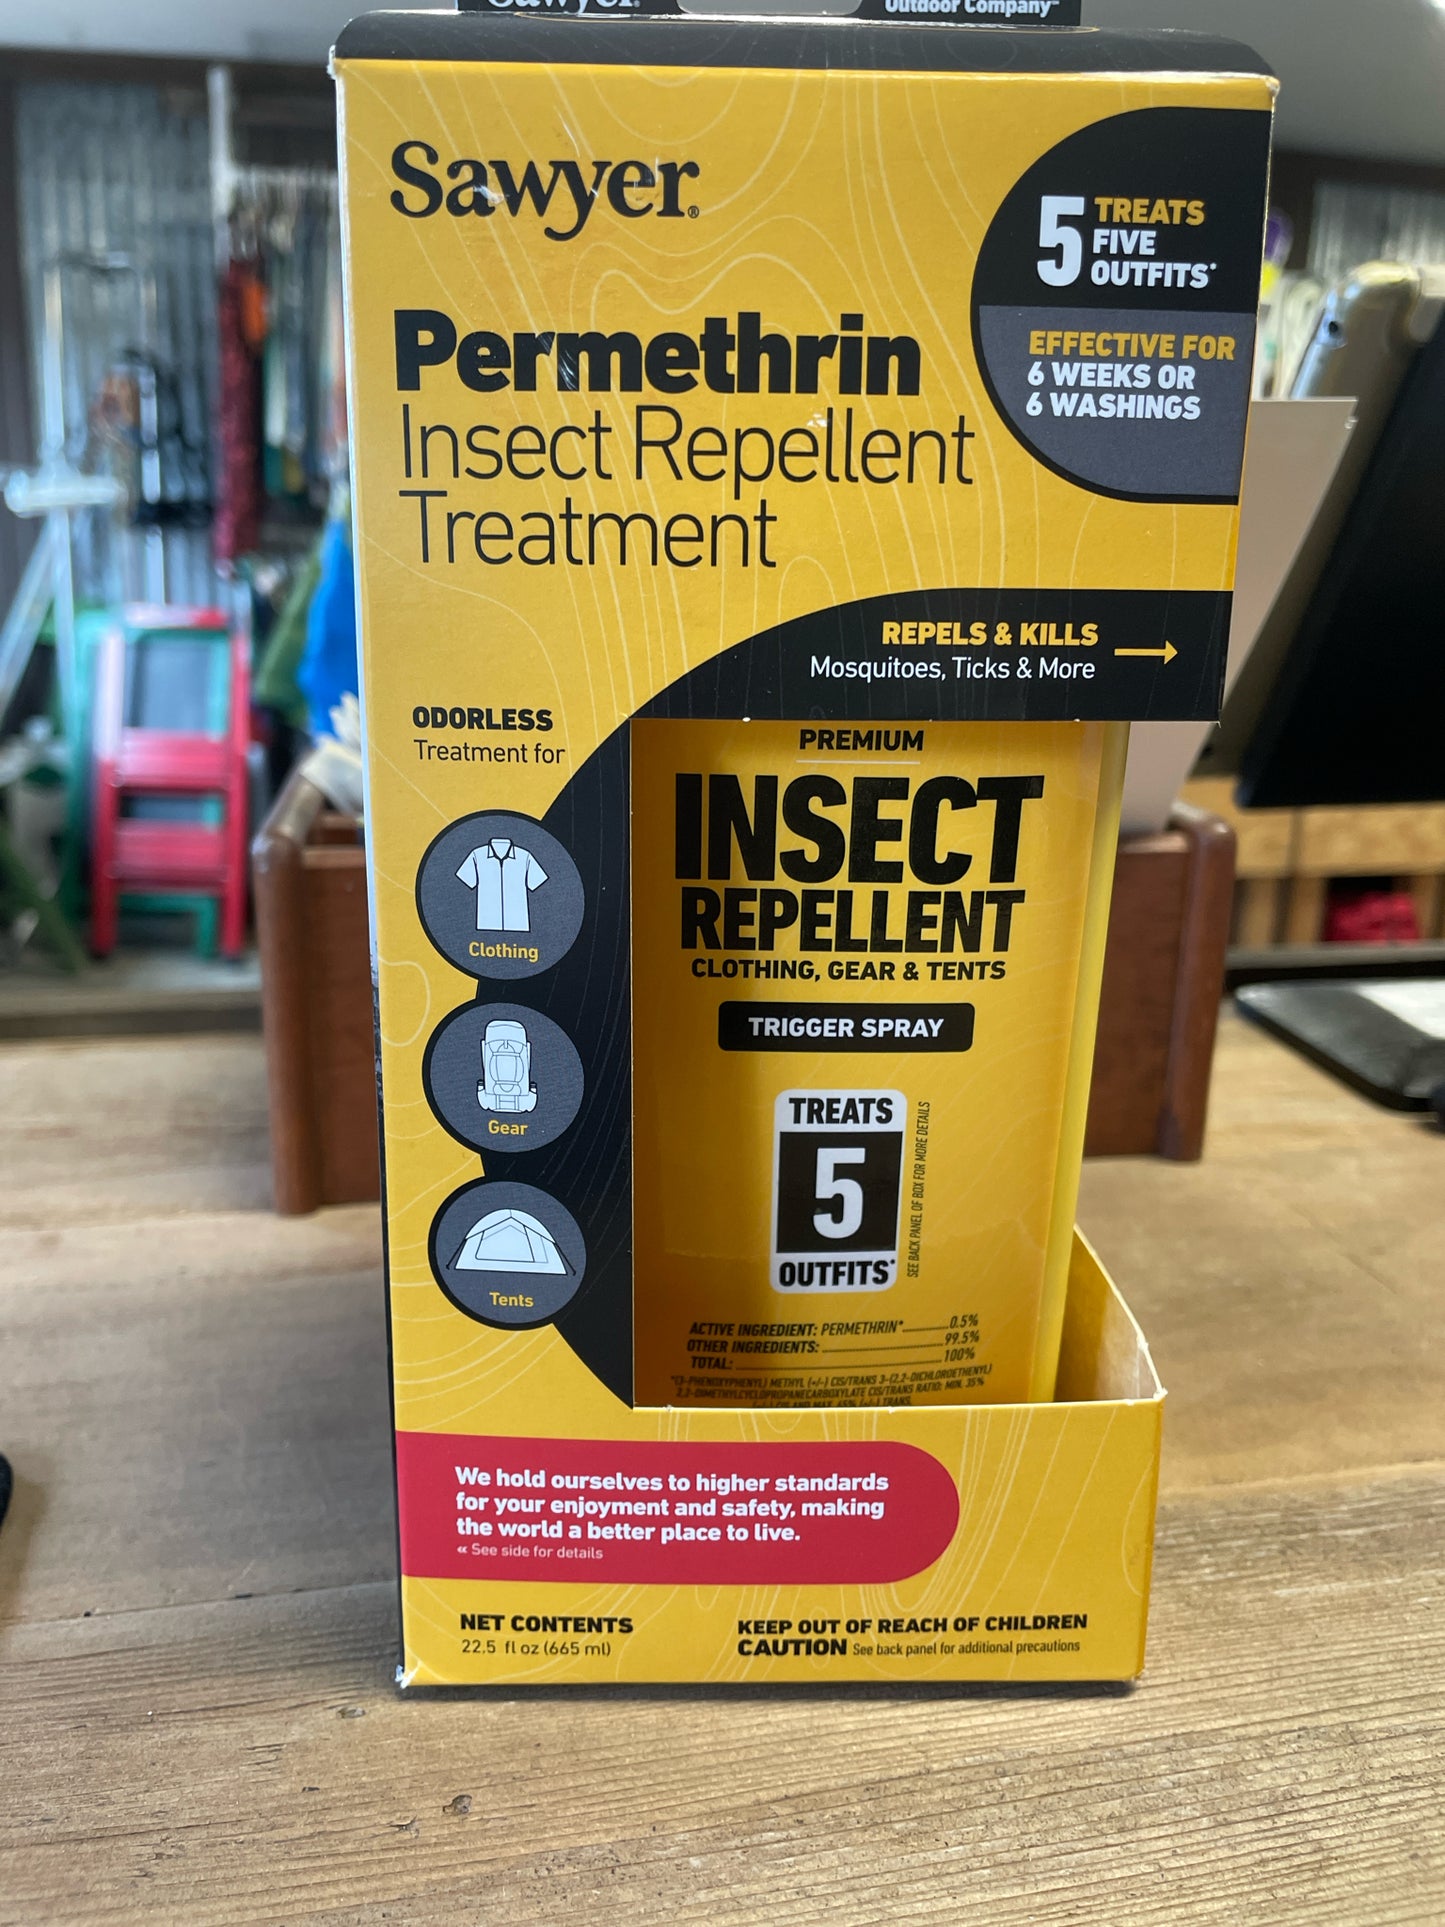 Sawyer insect Repellent Treatment